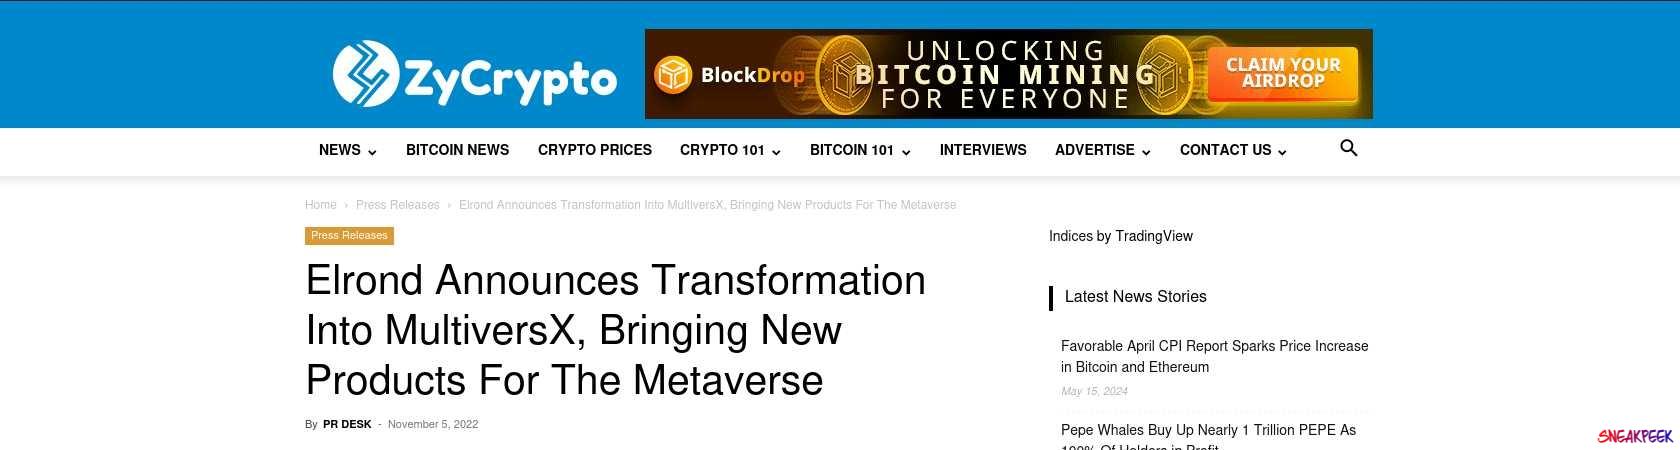 Read the full Article:  ⭲ Elrond Announces Transformation Into MultiversX, Bringing New Products For The Metaverse